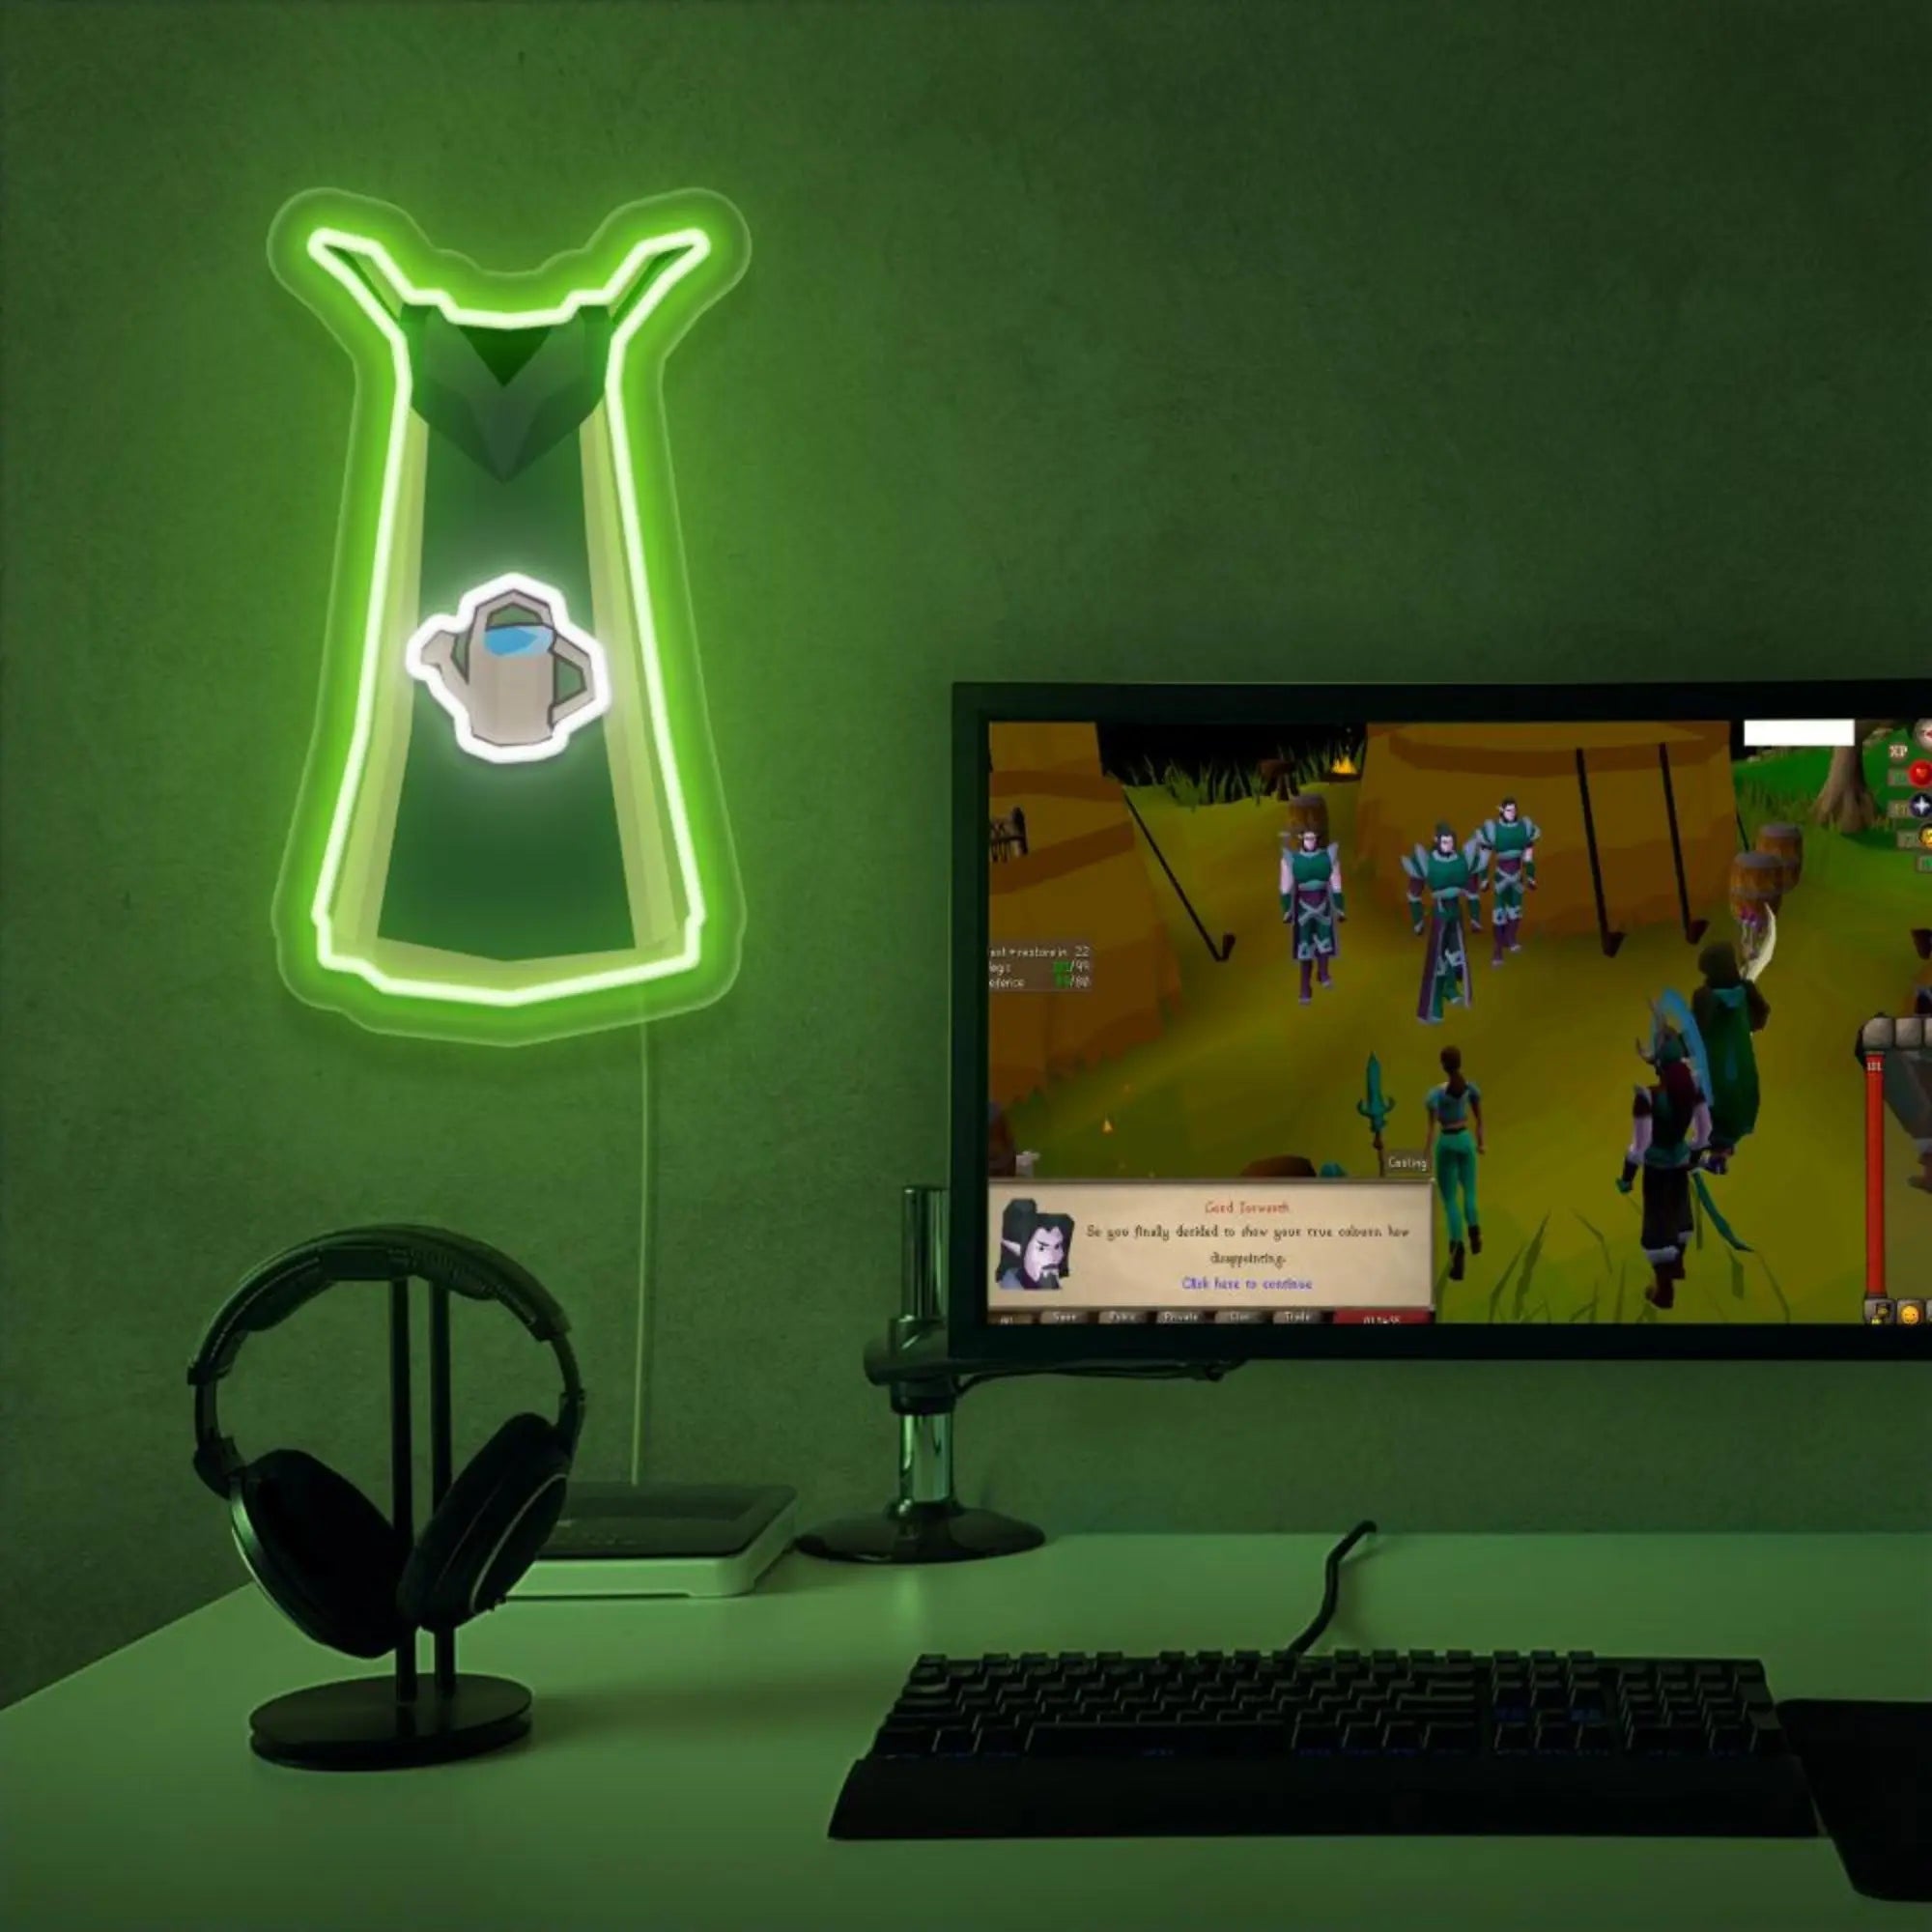 Position the Runescape Farming Skillcape LED neon sign next to your gaming PC for a dose of rustic charm. The iconic farming skill symbol evokes memories of tending to crops and harvesting resources in RuneScape, making this LED neon sign an ideal addition to your gaming setup. A nostalgic gift for Runescape fans.